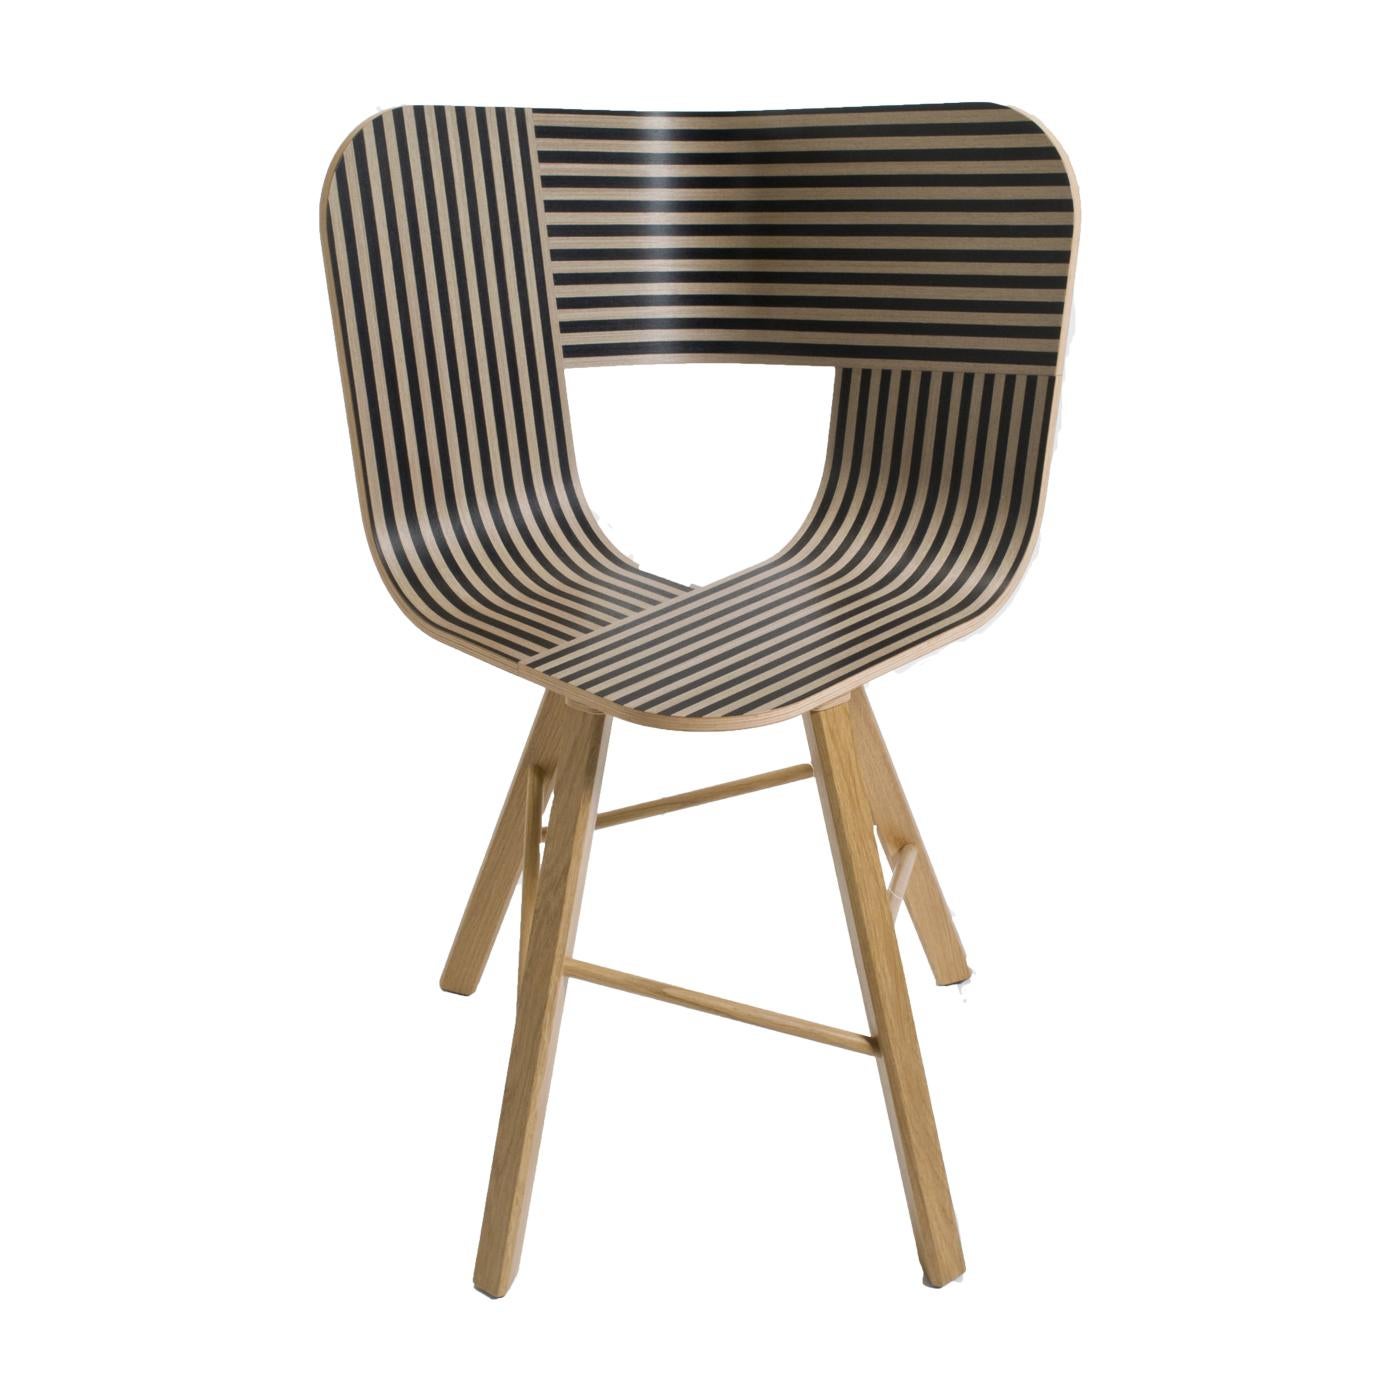 Tria wood 4 legs chair, striped seat ivory and black - solid oak wood structure by Colé Italia with Lorenz & Kaz
Dimensions: H 82.5, D 52, W 61 cm
Materials: Plywood chair; 4 legs solid oak base

Also available: tria; 3 legs, with cussion,